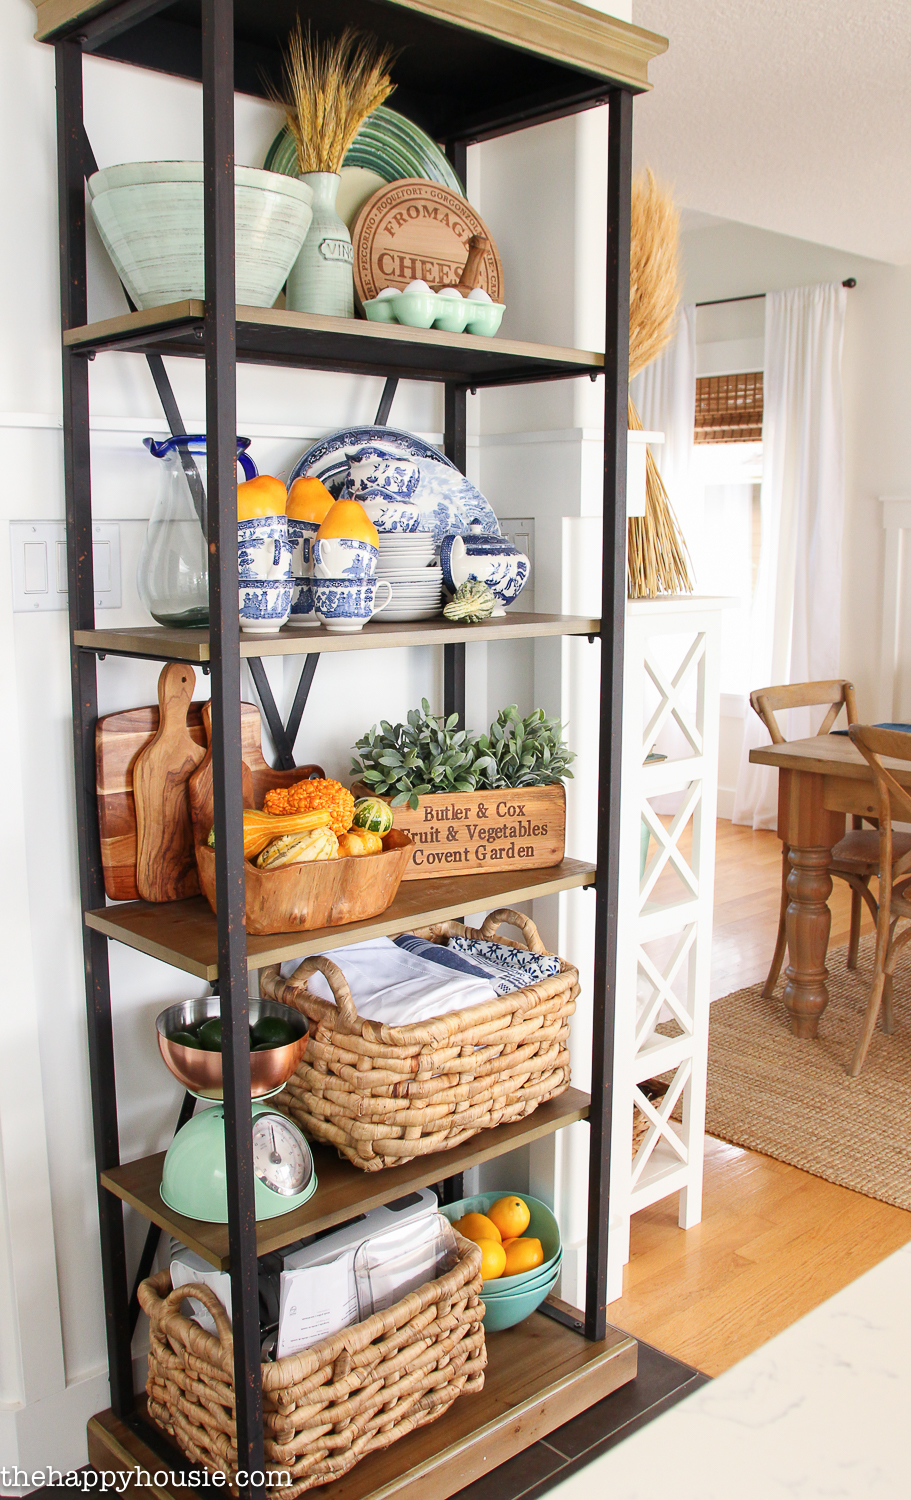 Open shelving in the dining room with vases, plates and baskets.